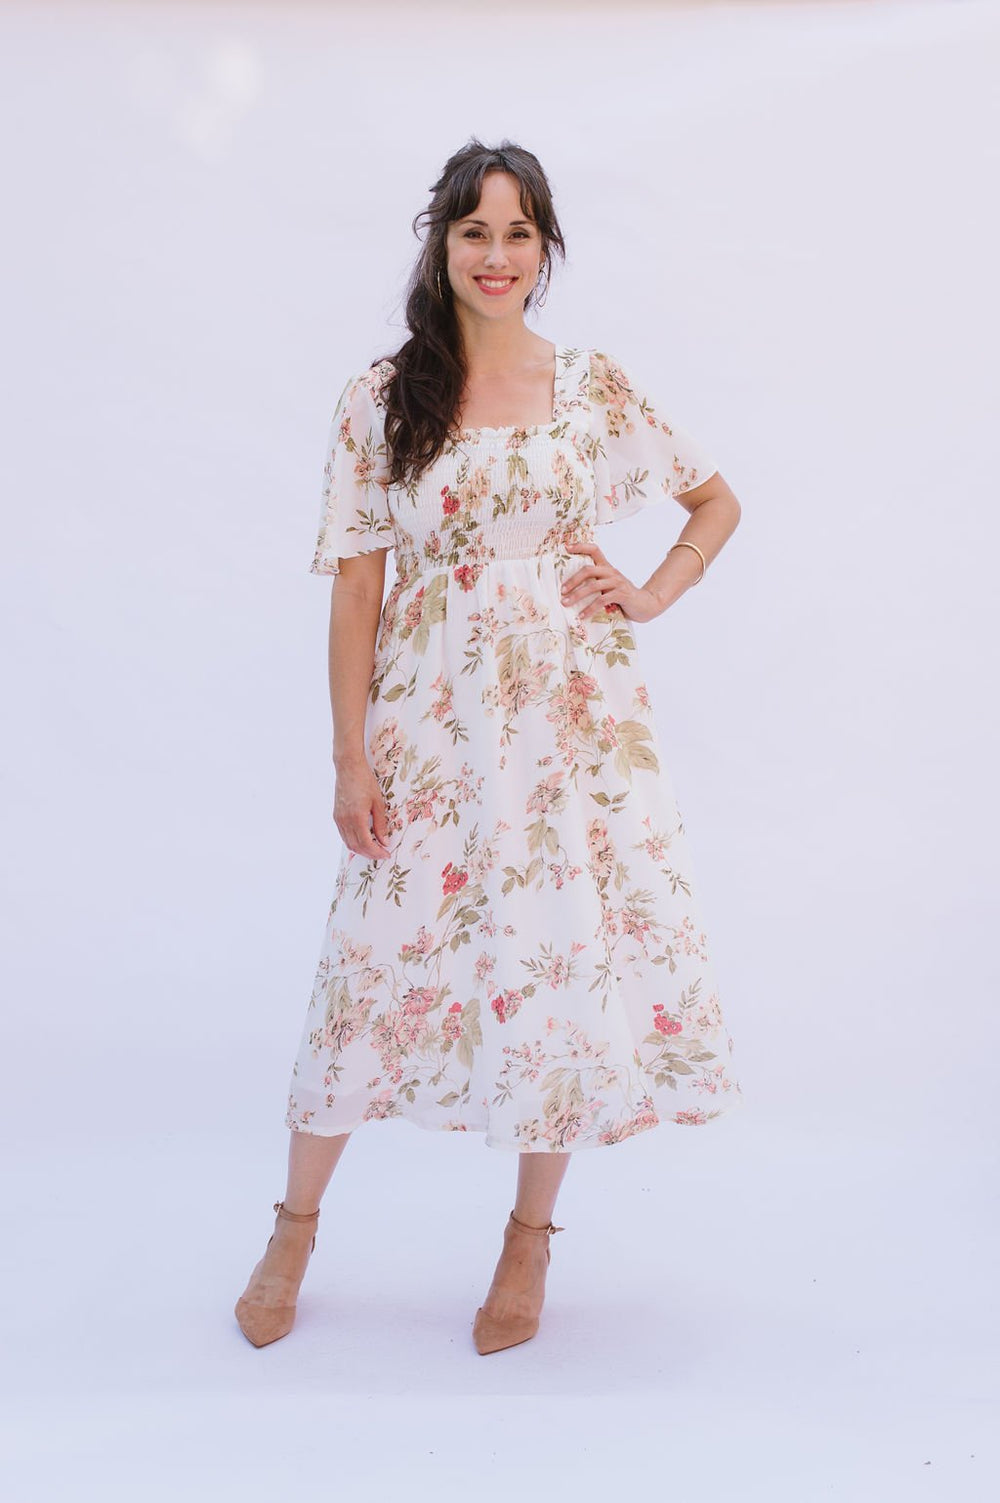 Woman wearing the Sofia Dress sewing pattern from Victory Patterns on The Fold Line. A dress pattern made in cotton, gingham, broadcloth, rayon, linen, single gauze, or crepe fabrics, featuring an elasticated waist length shirred bodice, square neckline, 